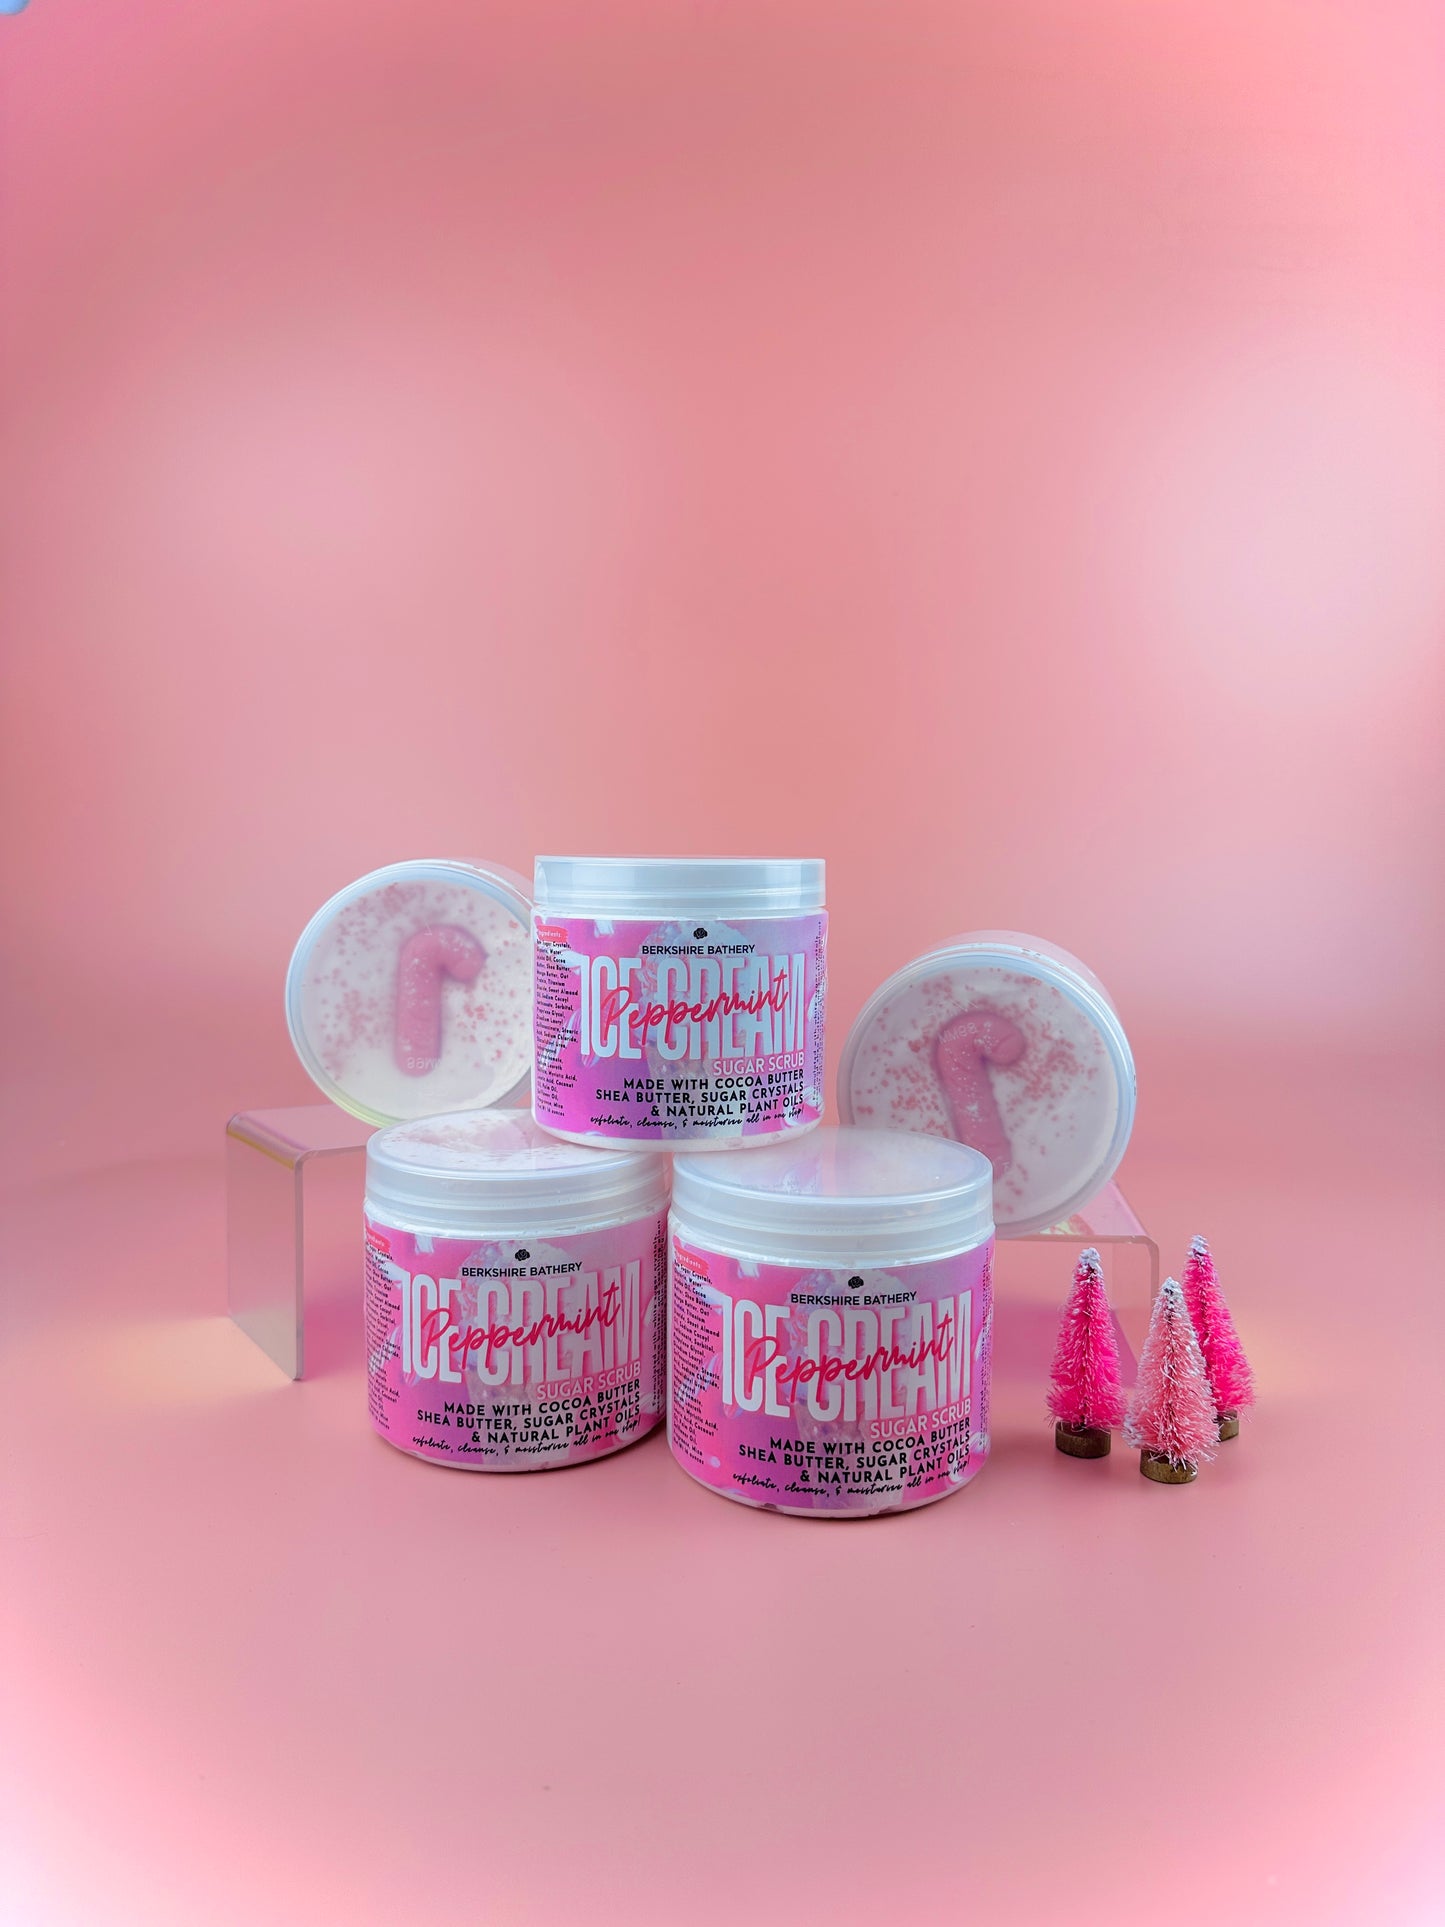 Peppermint Ice Cream | Whipped Sugar Scrub | Made With Cocoa Butter + Shea Butter + Jojoba Oil